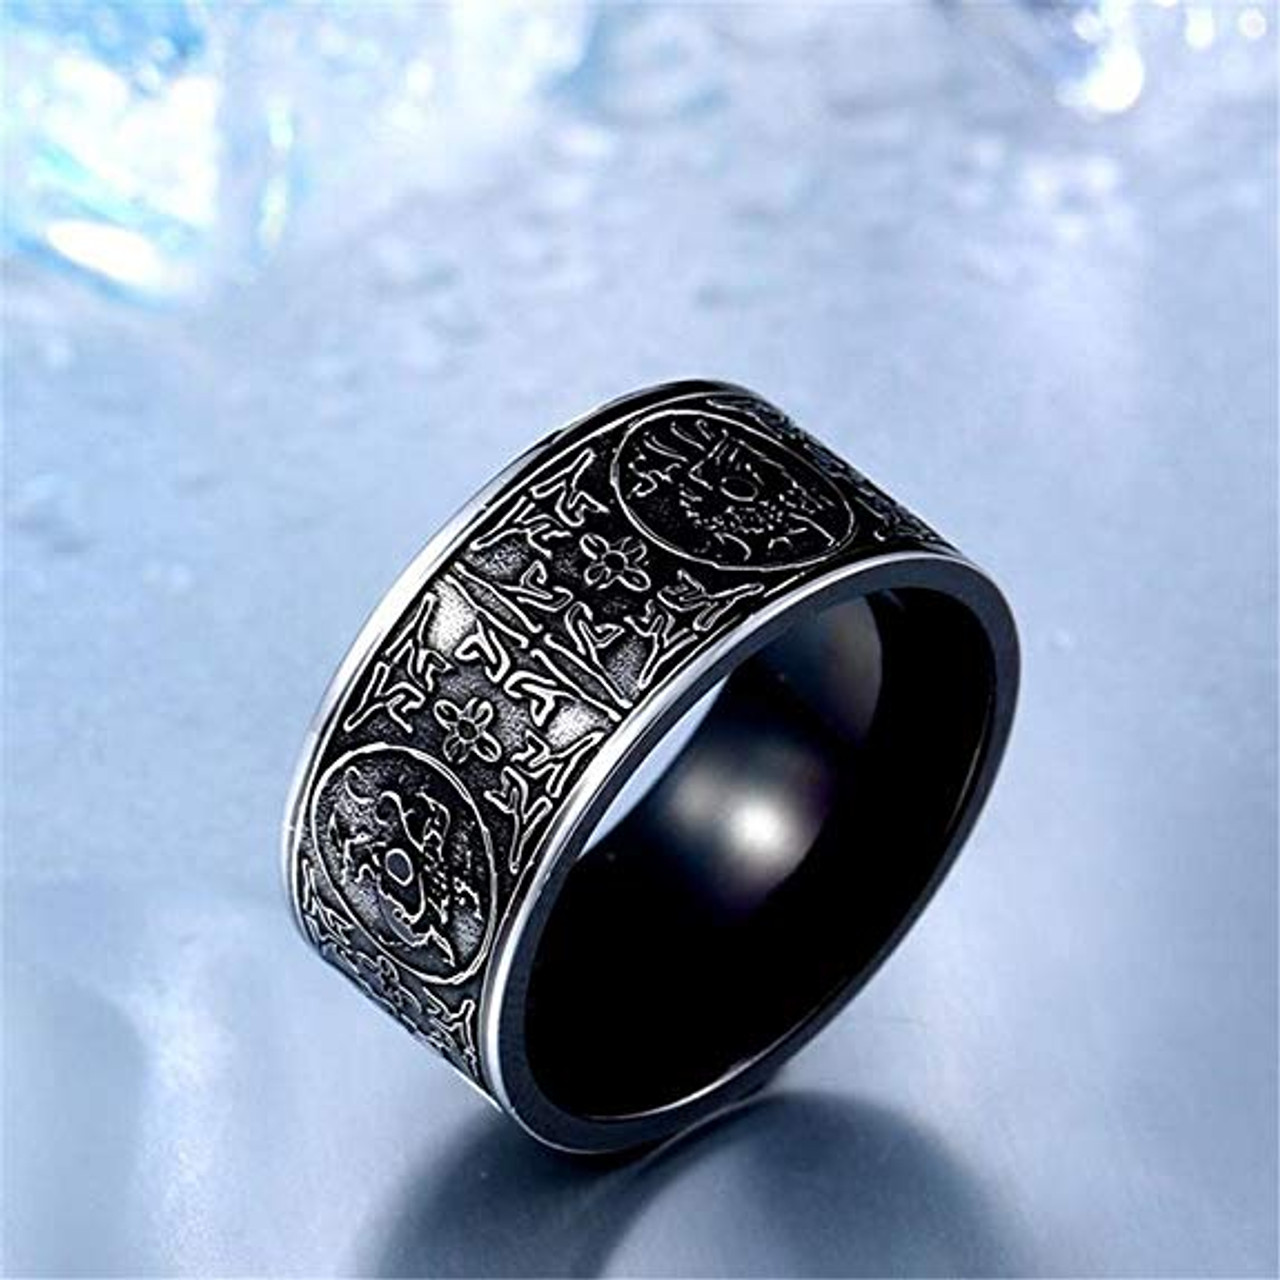 (8mm)  Unisex or Men's Titanium / Stainless Steel Wedding ring band. Ancient Dragon, White Tiger, etc. Carved Designs